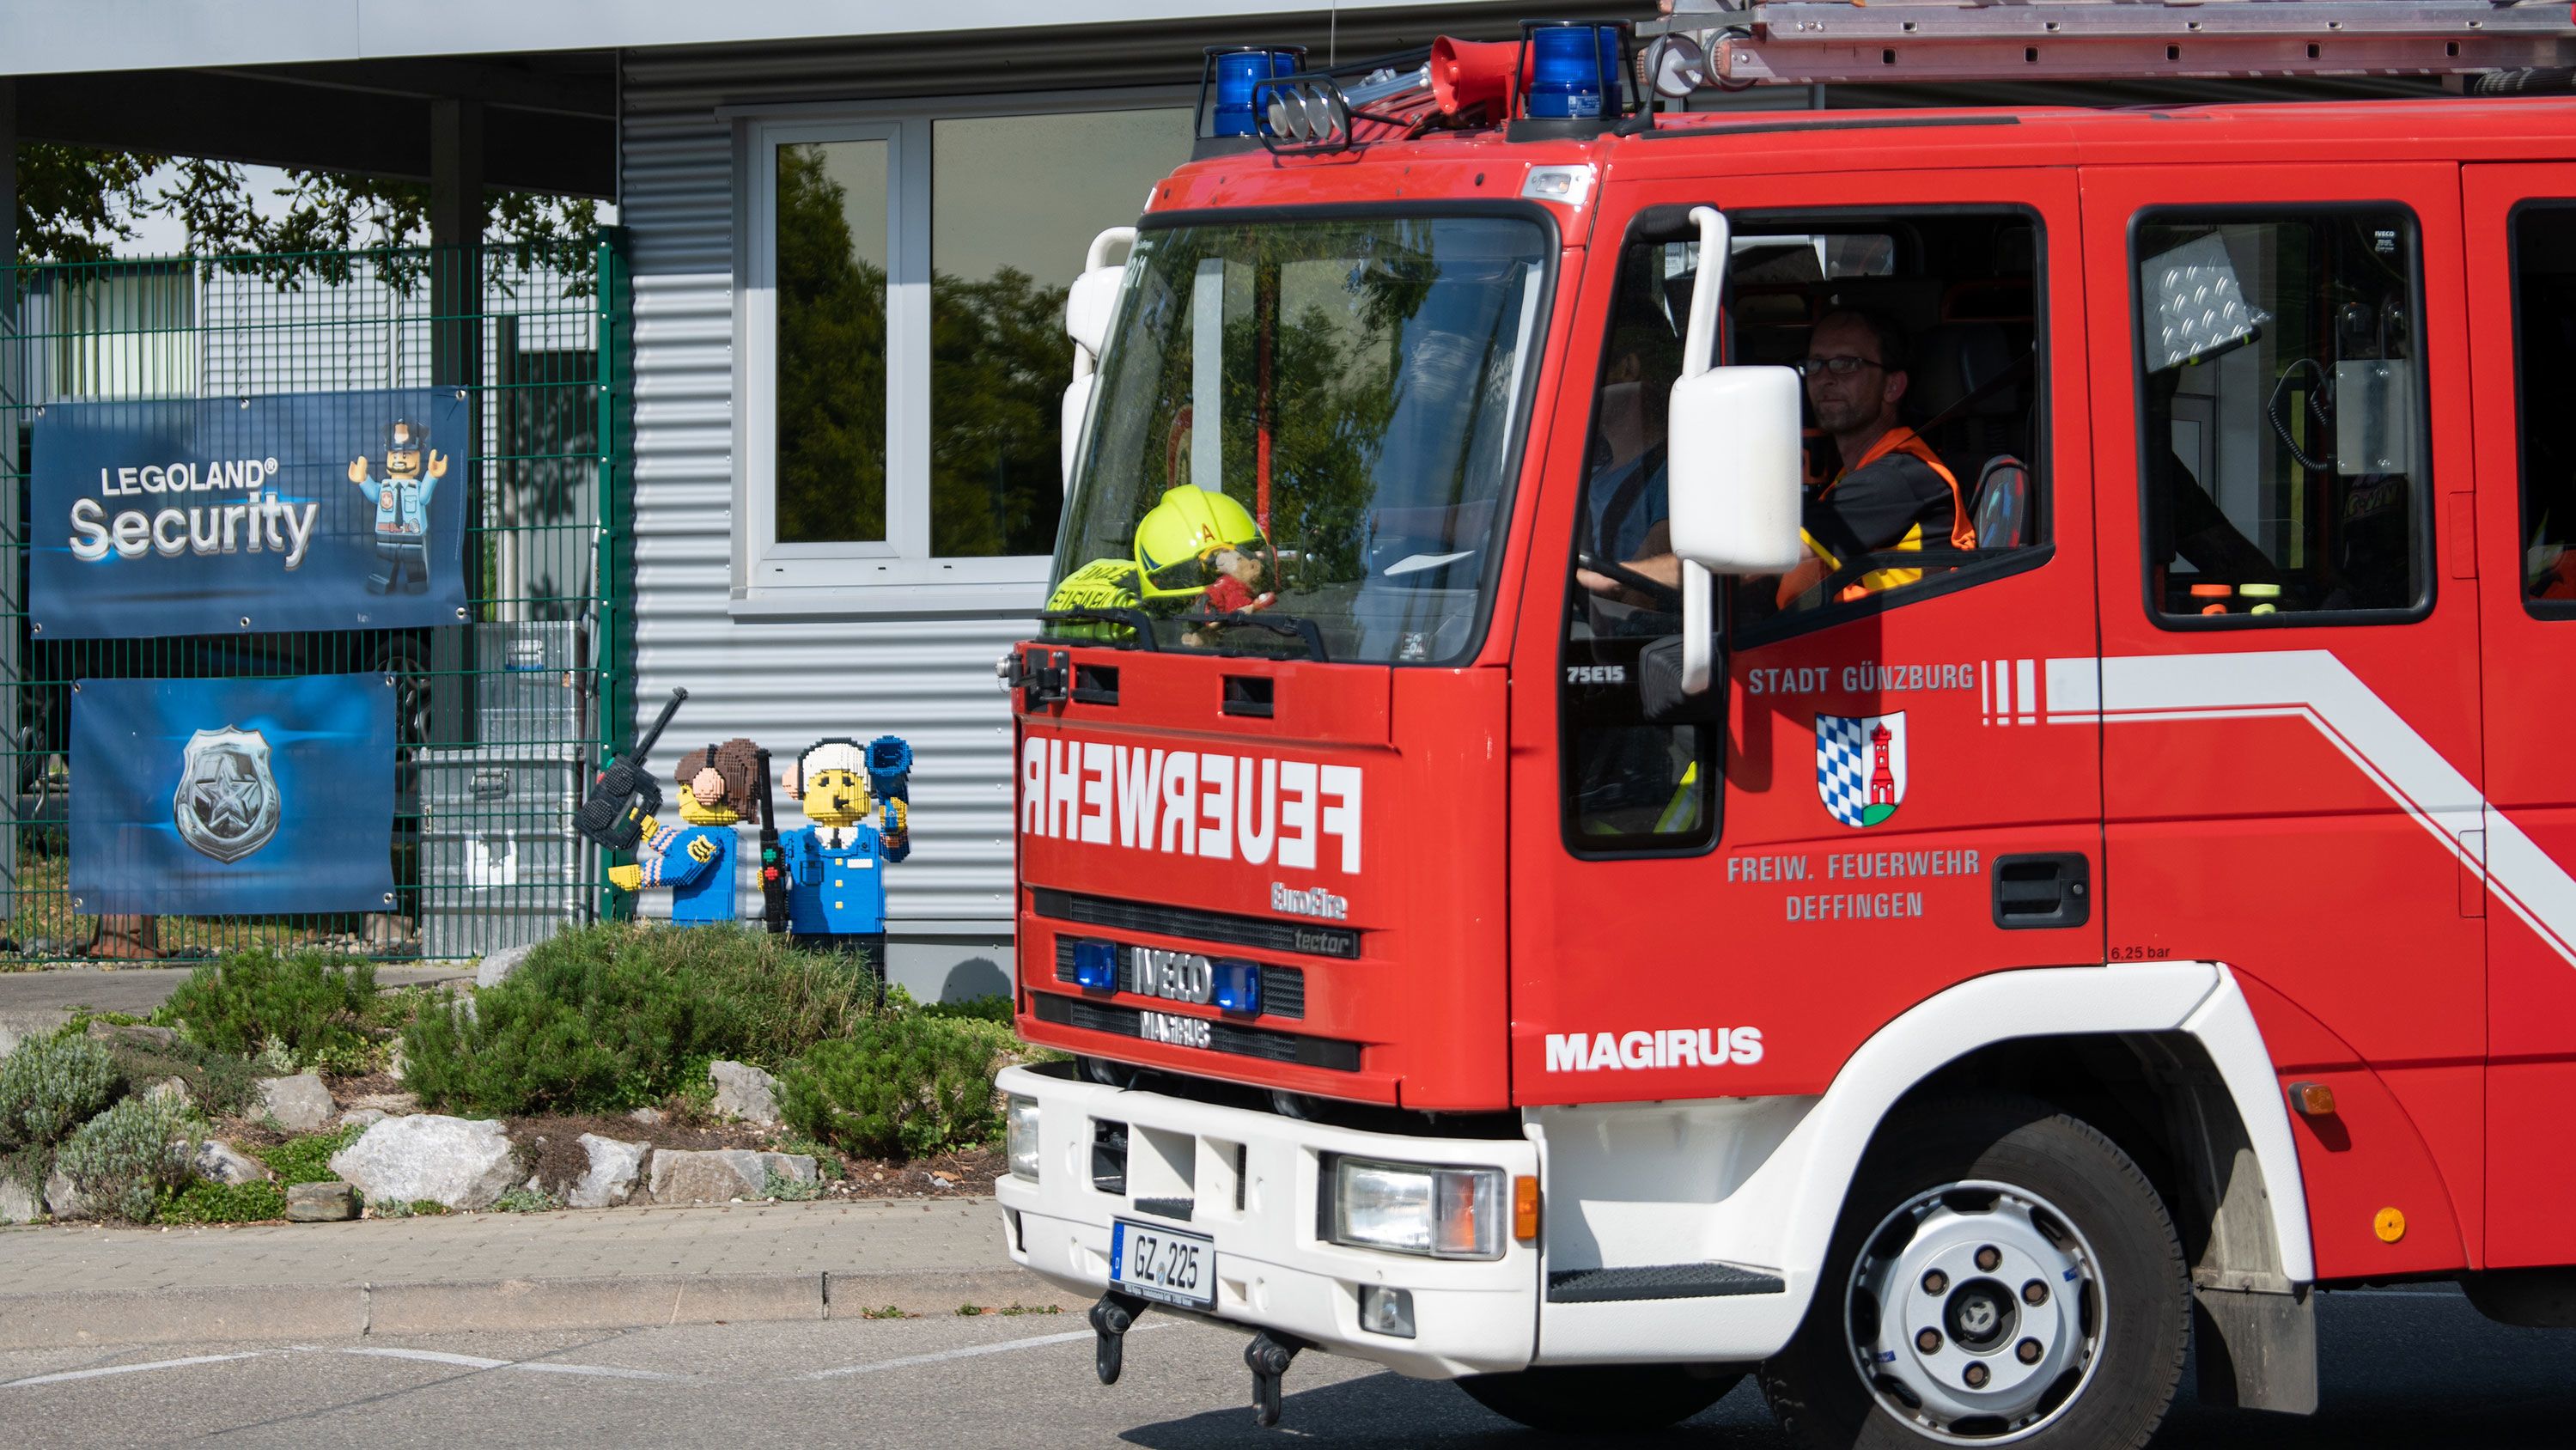 A fire truck drives past the entrance to Legoland in the Bavarian town.